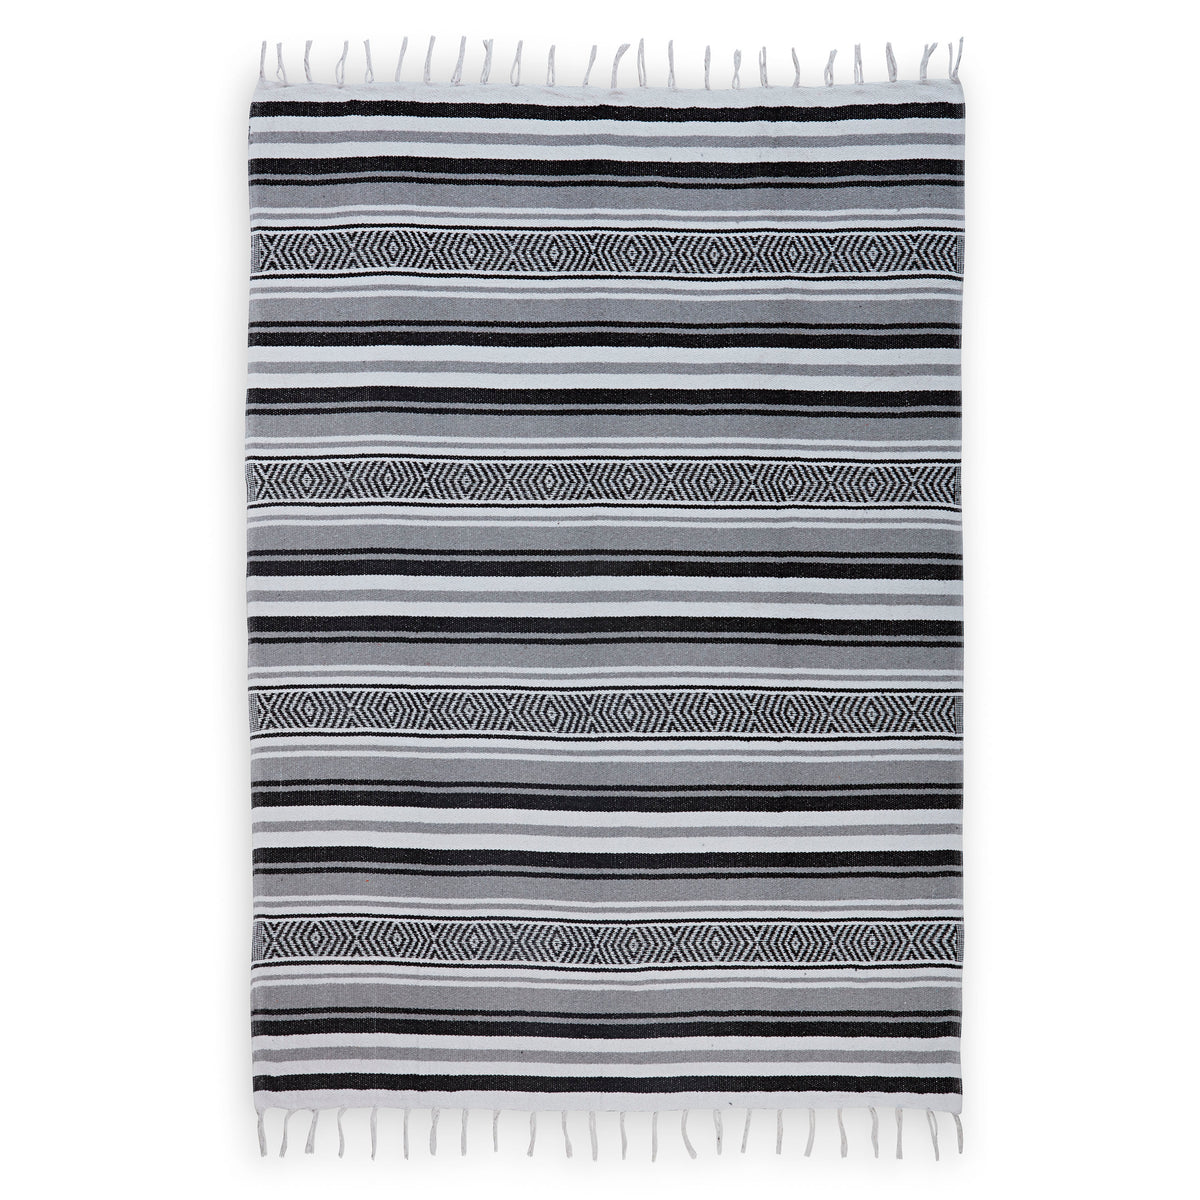 Traditional Mexican Woven Blanket grey black flat